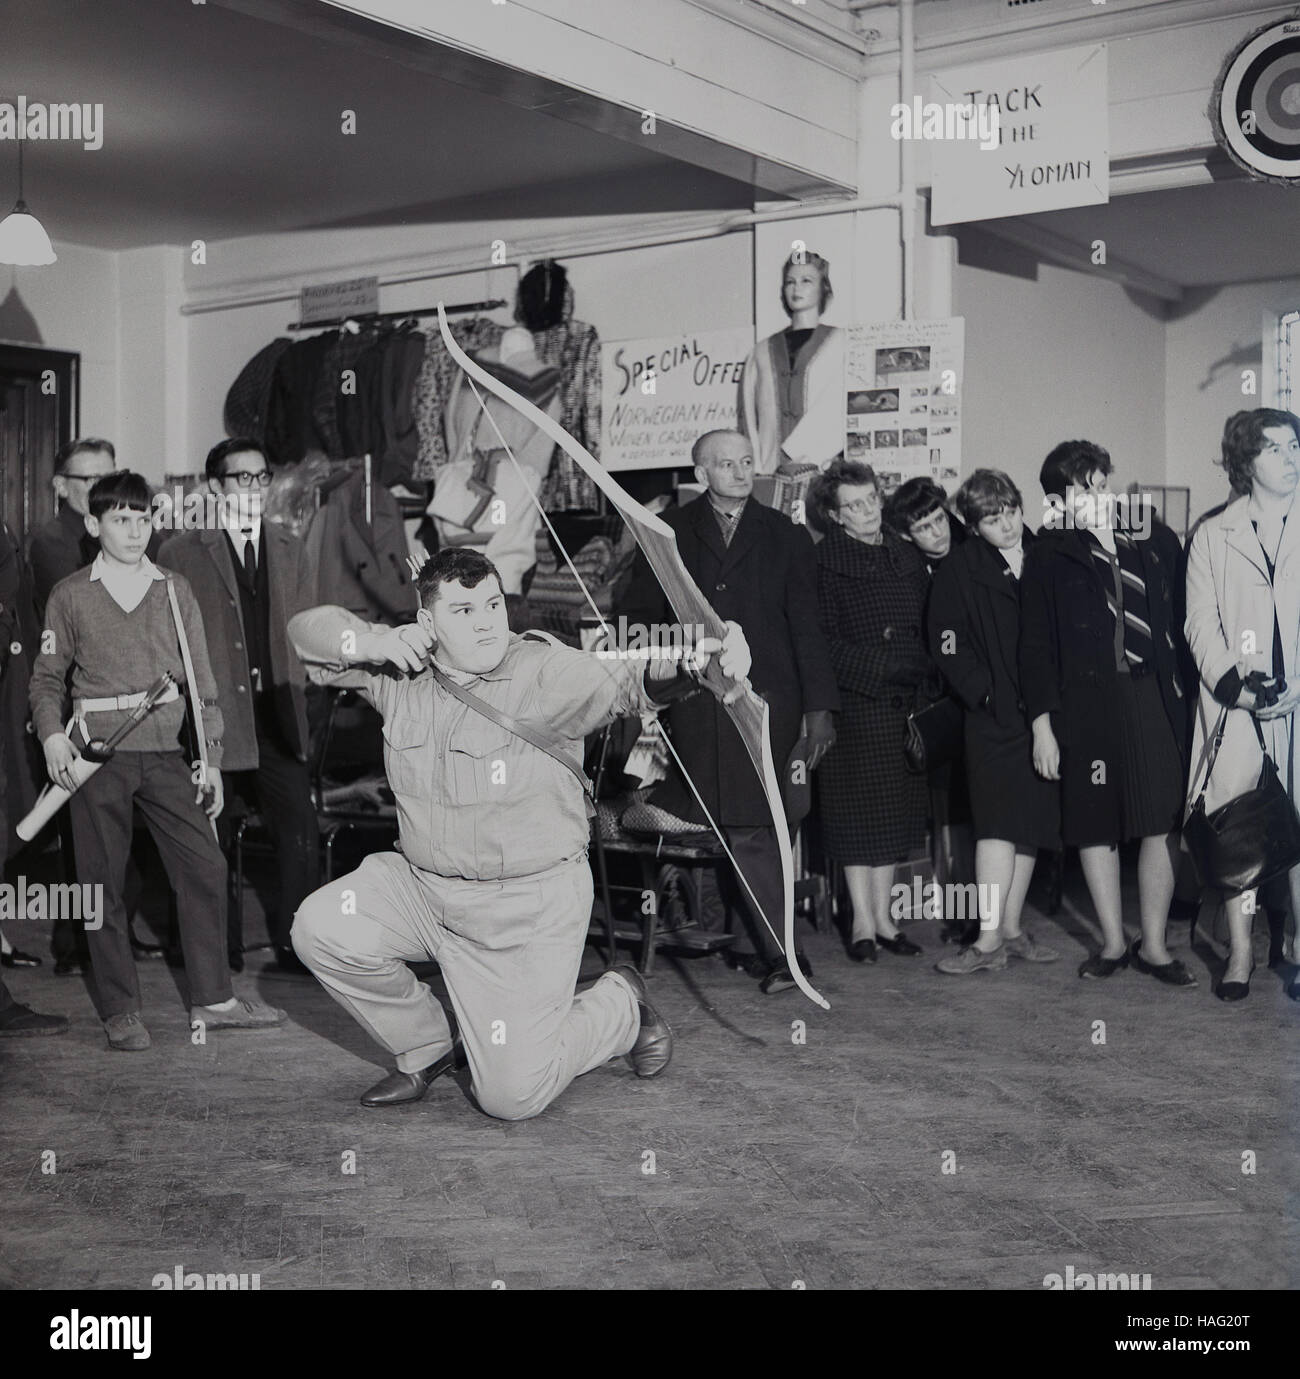 1960s, a demonstration by a male archer with a bow & arrow inside a store to promote the archery products of the 'Jack The Yeoman' compamy, England, UK. Stock Photo